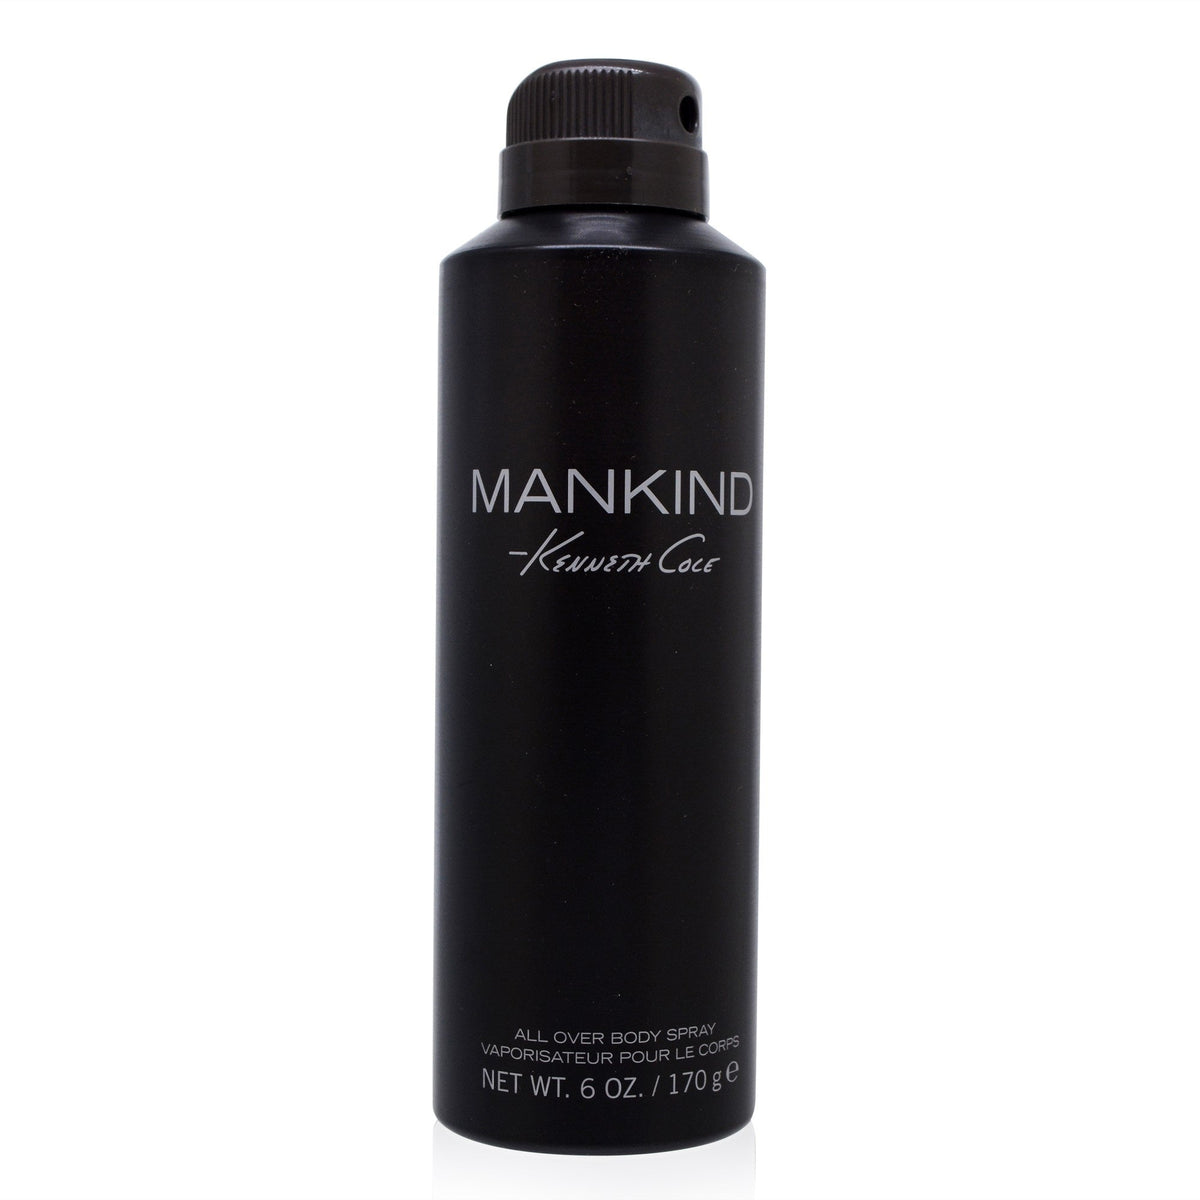 Kenneth Cole Mankind Kenneth Cole All Over Body Spray 6.0 Oz (170 Ml) For Men  